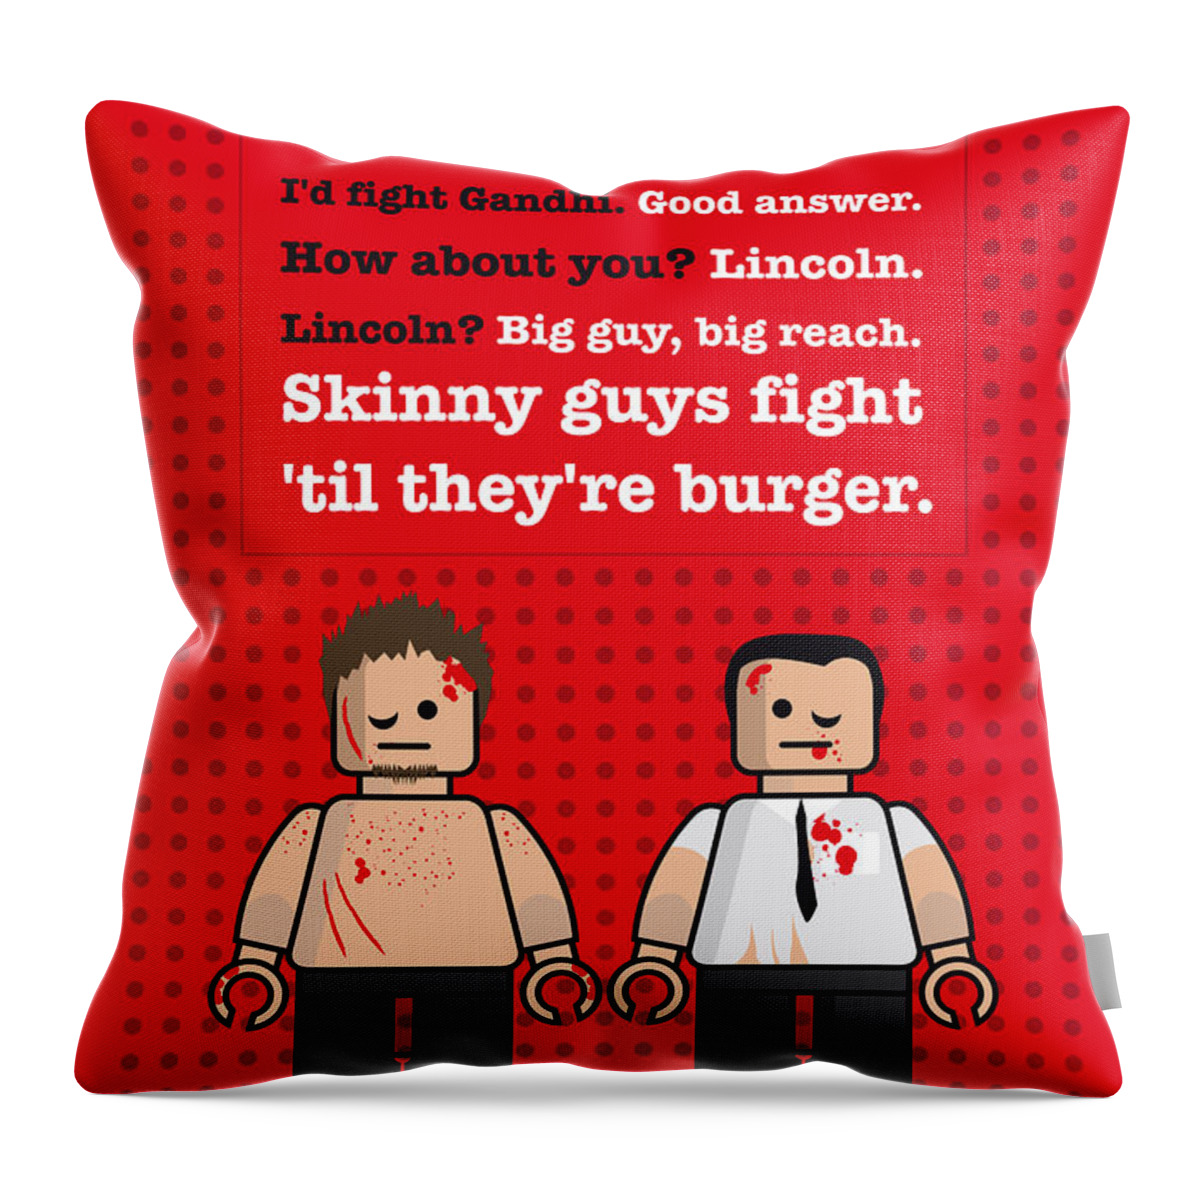 Fight Throw Pillow featuring the digital art My Fight club lego dialogue poster by Chungkong Art